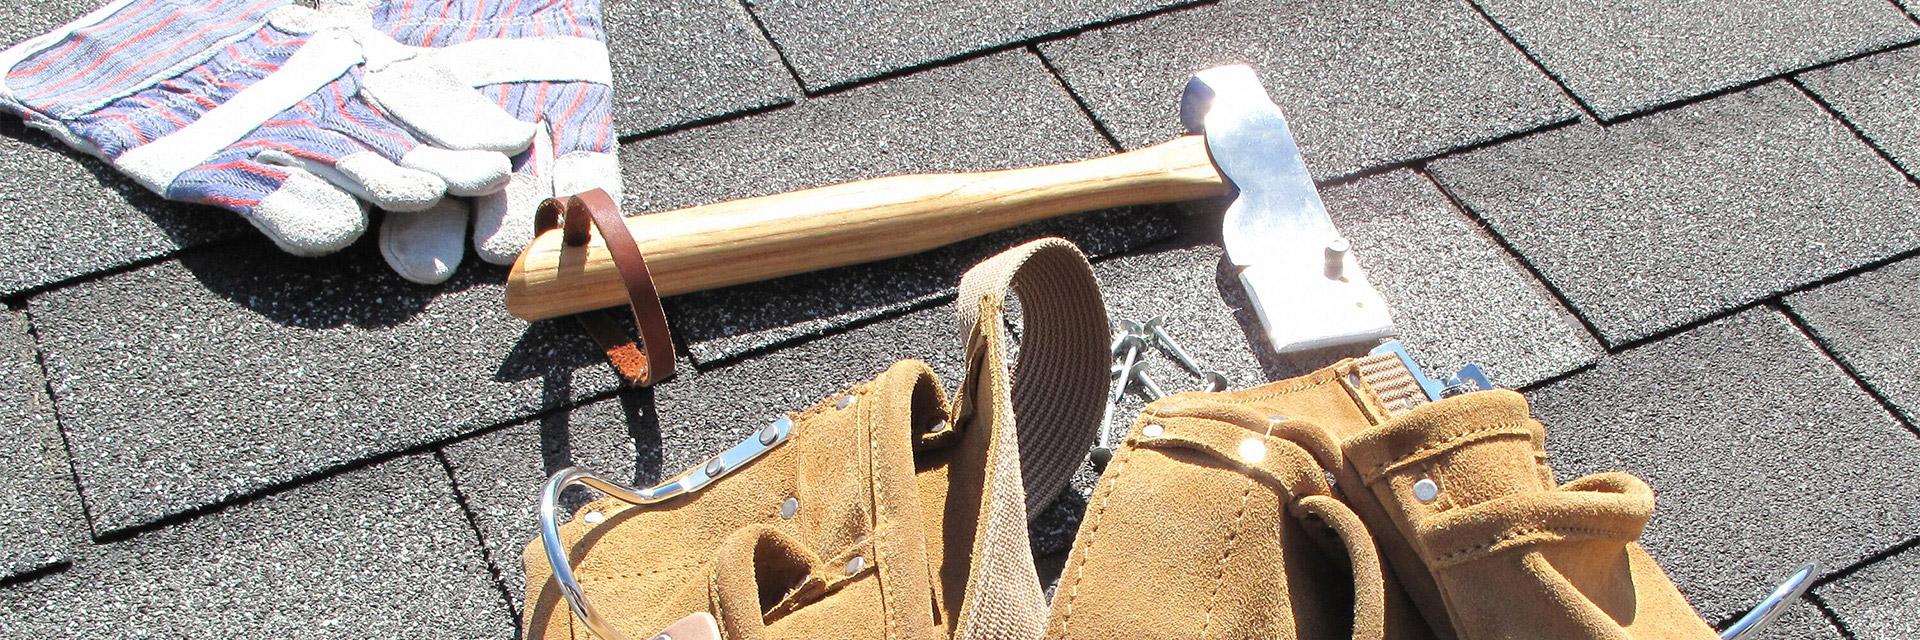 8 Essential Tools Every Roofing Contractor Should Have